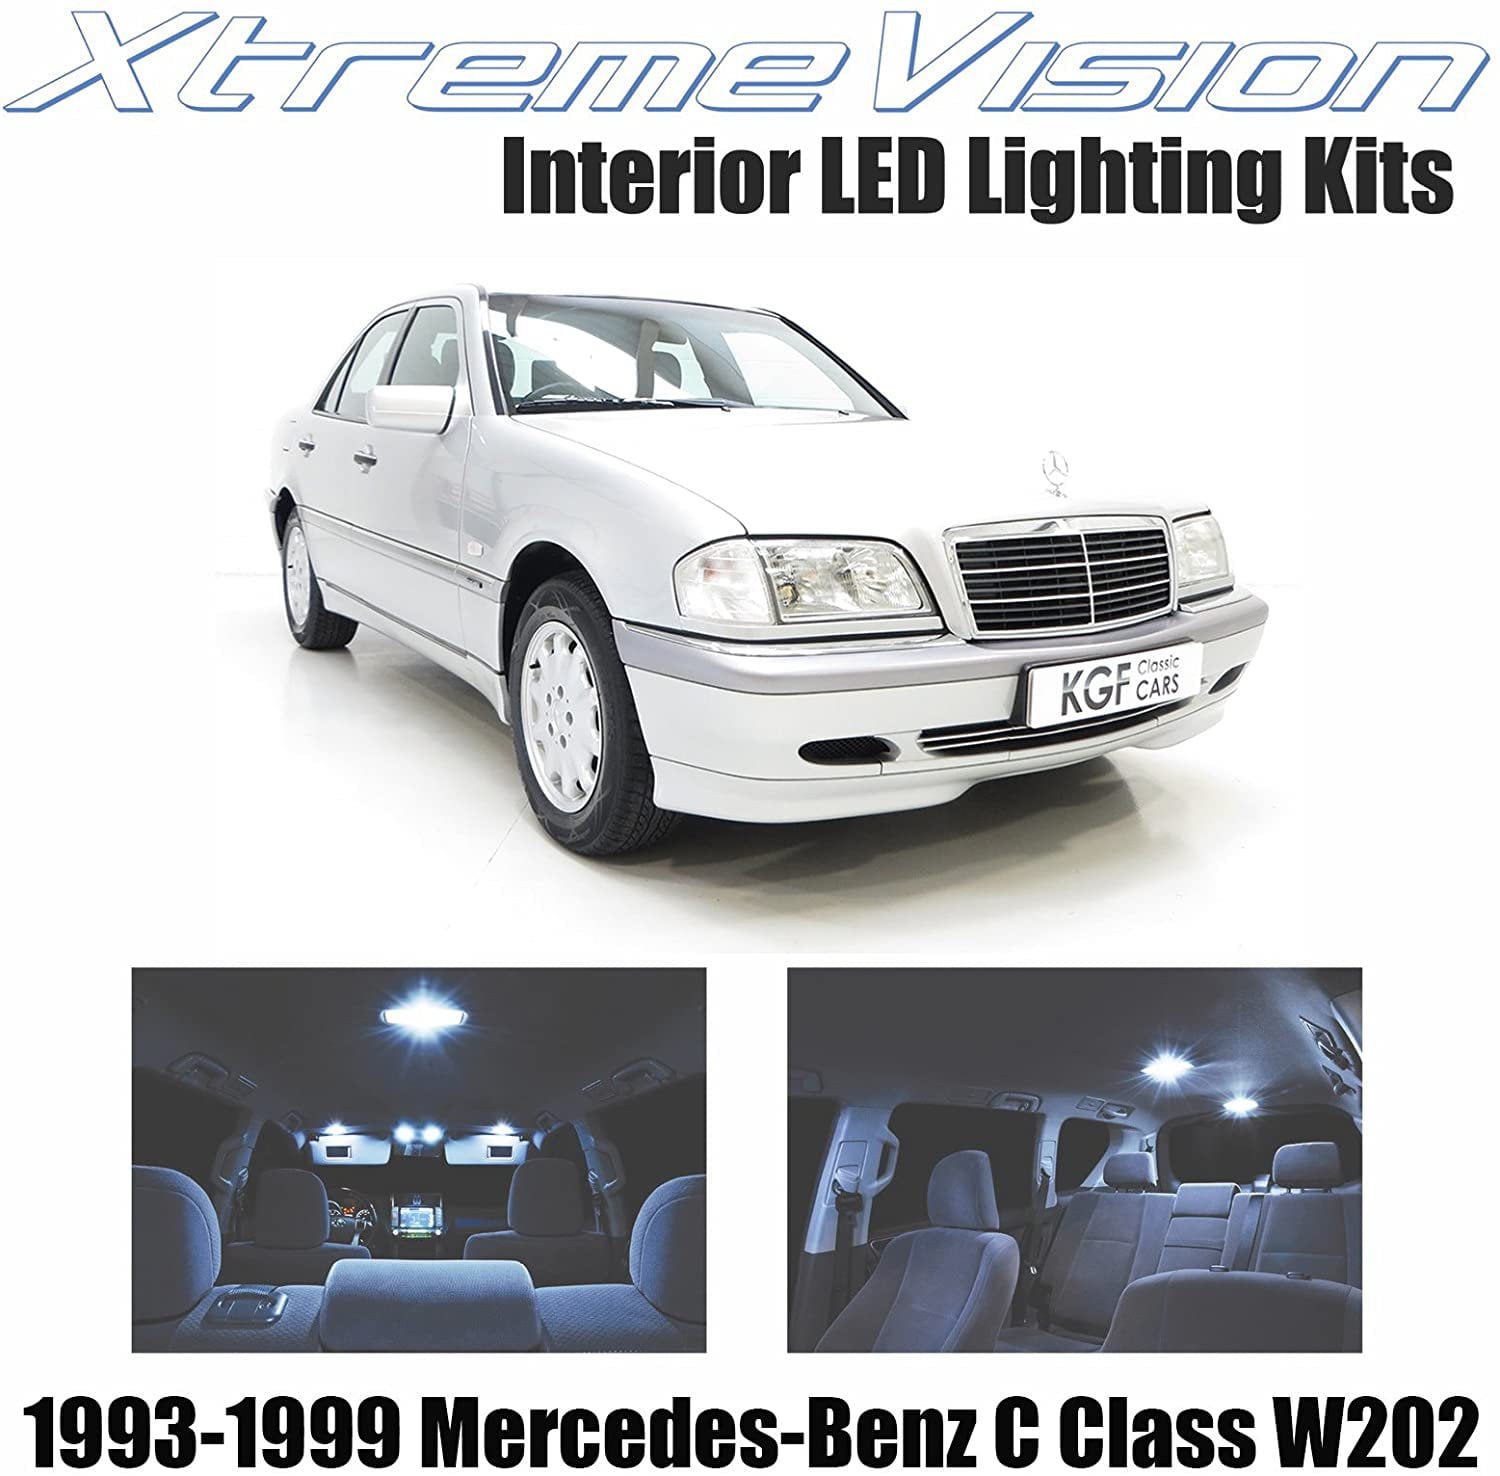 Xtremevision Interior LED for Mercedes-Benz C Class W202 1993-1999 14  Pieces Cool White Interior LED Kit + Installation Tool 